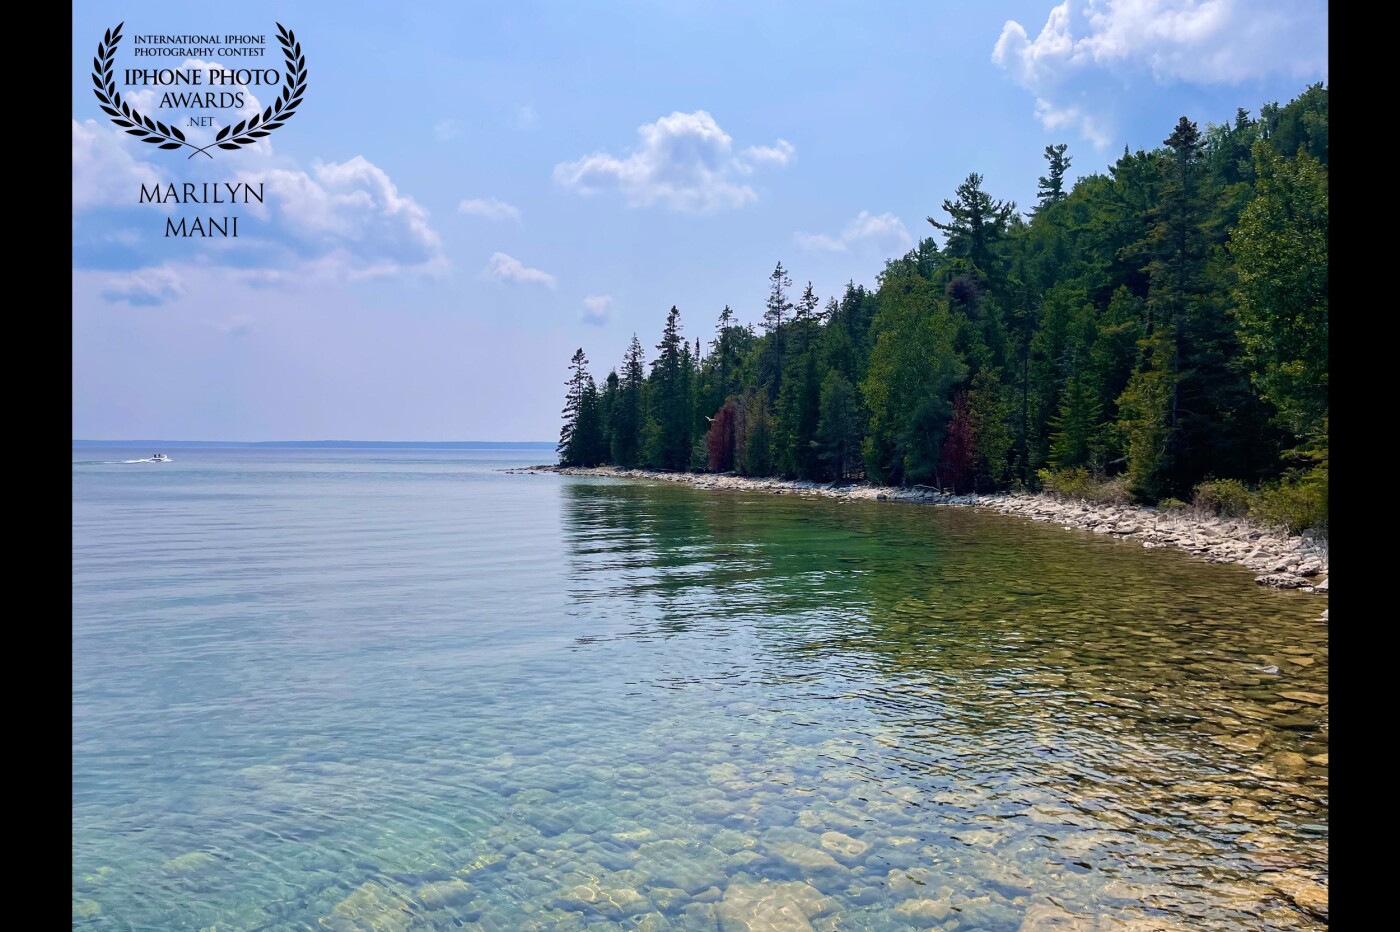 "If there is magic in this planet, it is contained in water"...The beautiful serene Lake Huron in Tobermory, Canada! The shoreline is simply gorgeous with the clear cool turquoise waters, the pebbles and rock beneath and the fragile forests along the shoreline. So soothing!